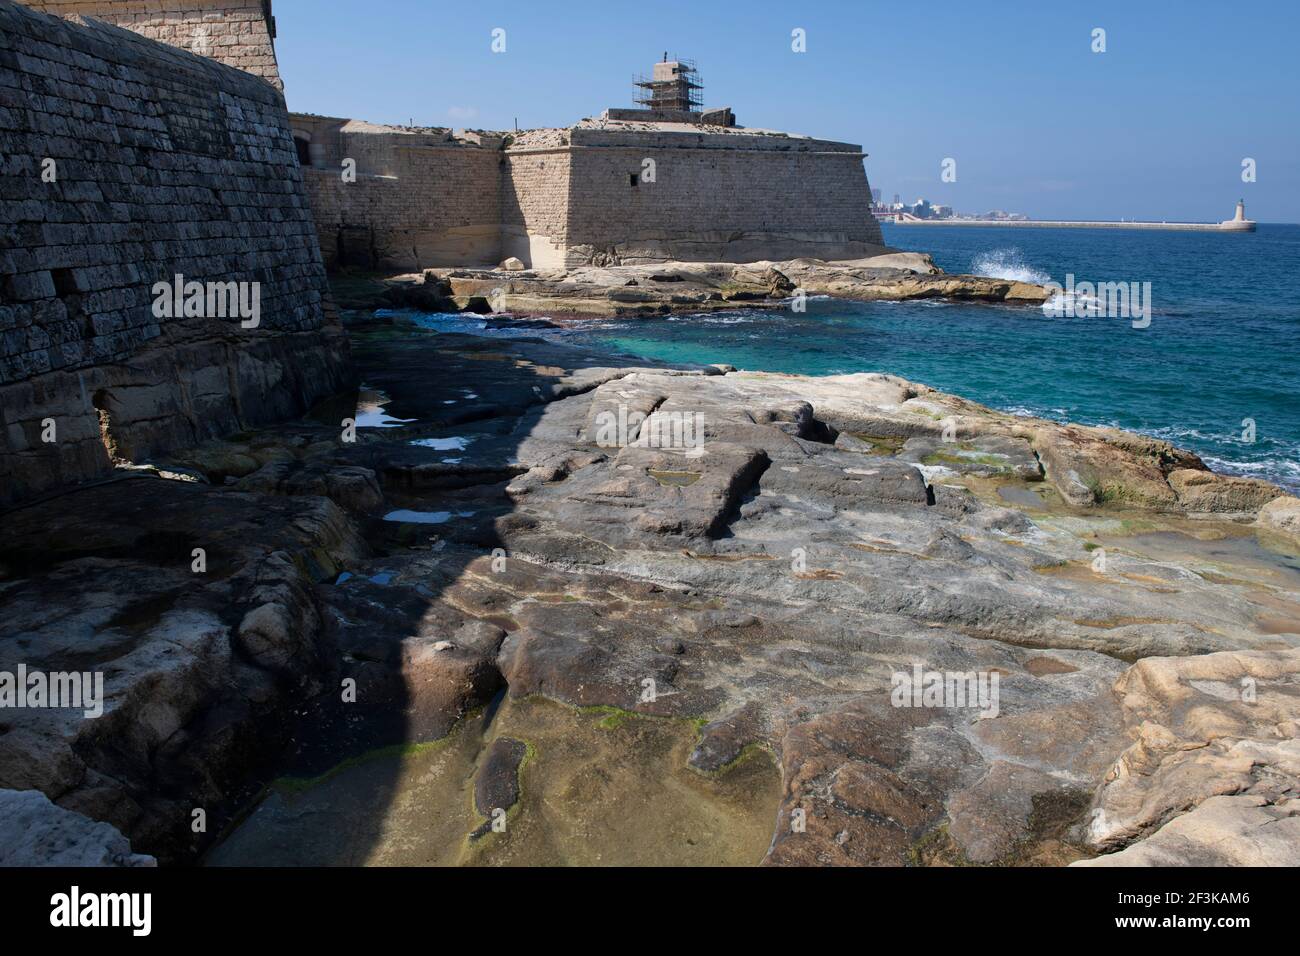 Fragment photos and ruins of Fort Ricasoli which was built by the Order of Saint John between 1670 and 1698,situated in Kalkara, Malta. It is the larg Stock Photo